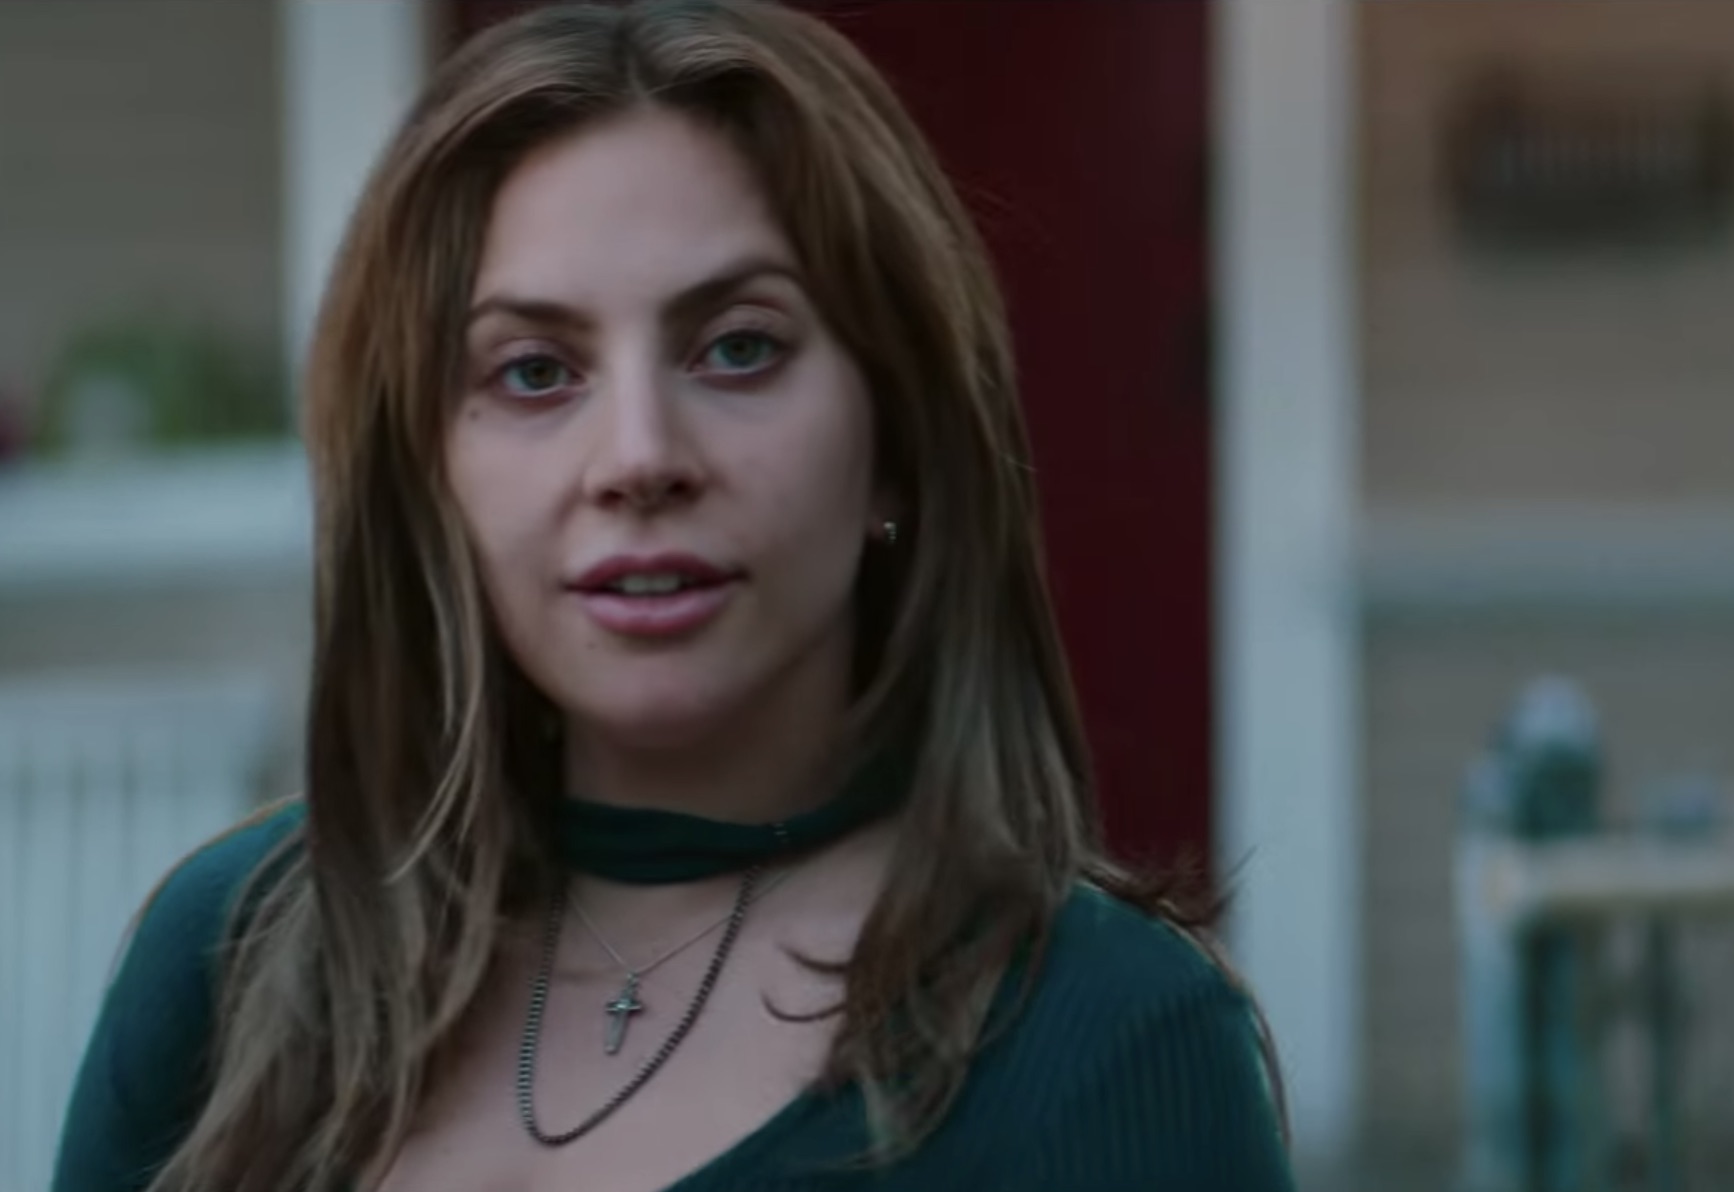 Lady Gaga Makes Her Movie Debut In The First Trailer For ‘A Star Is